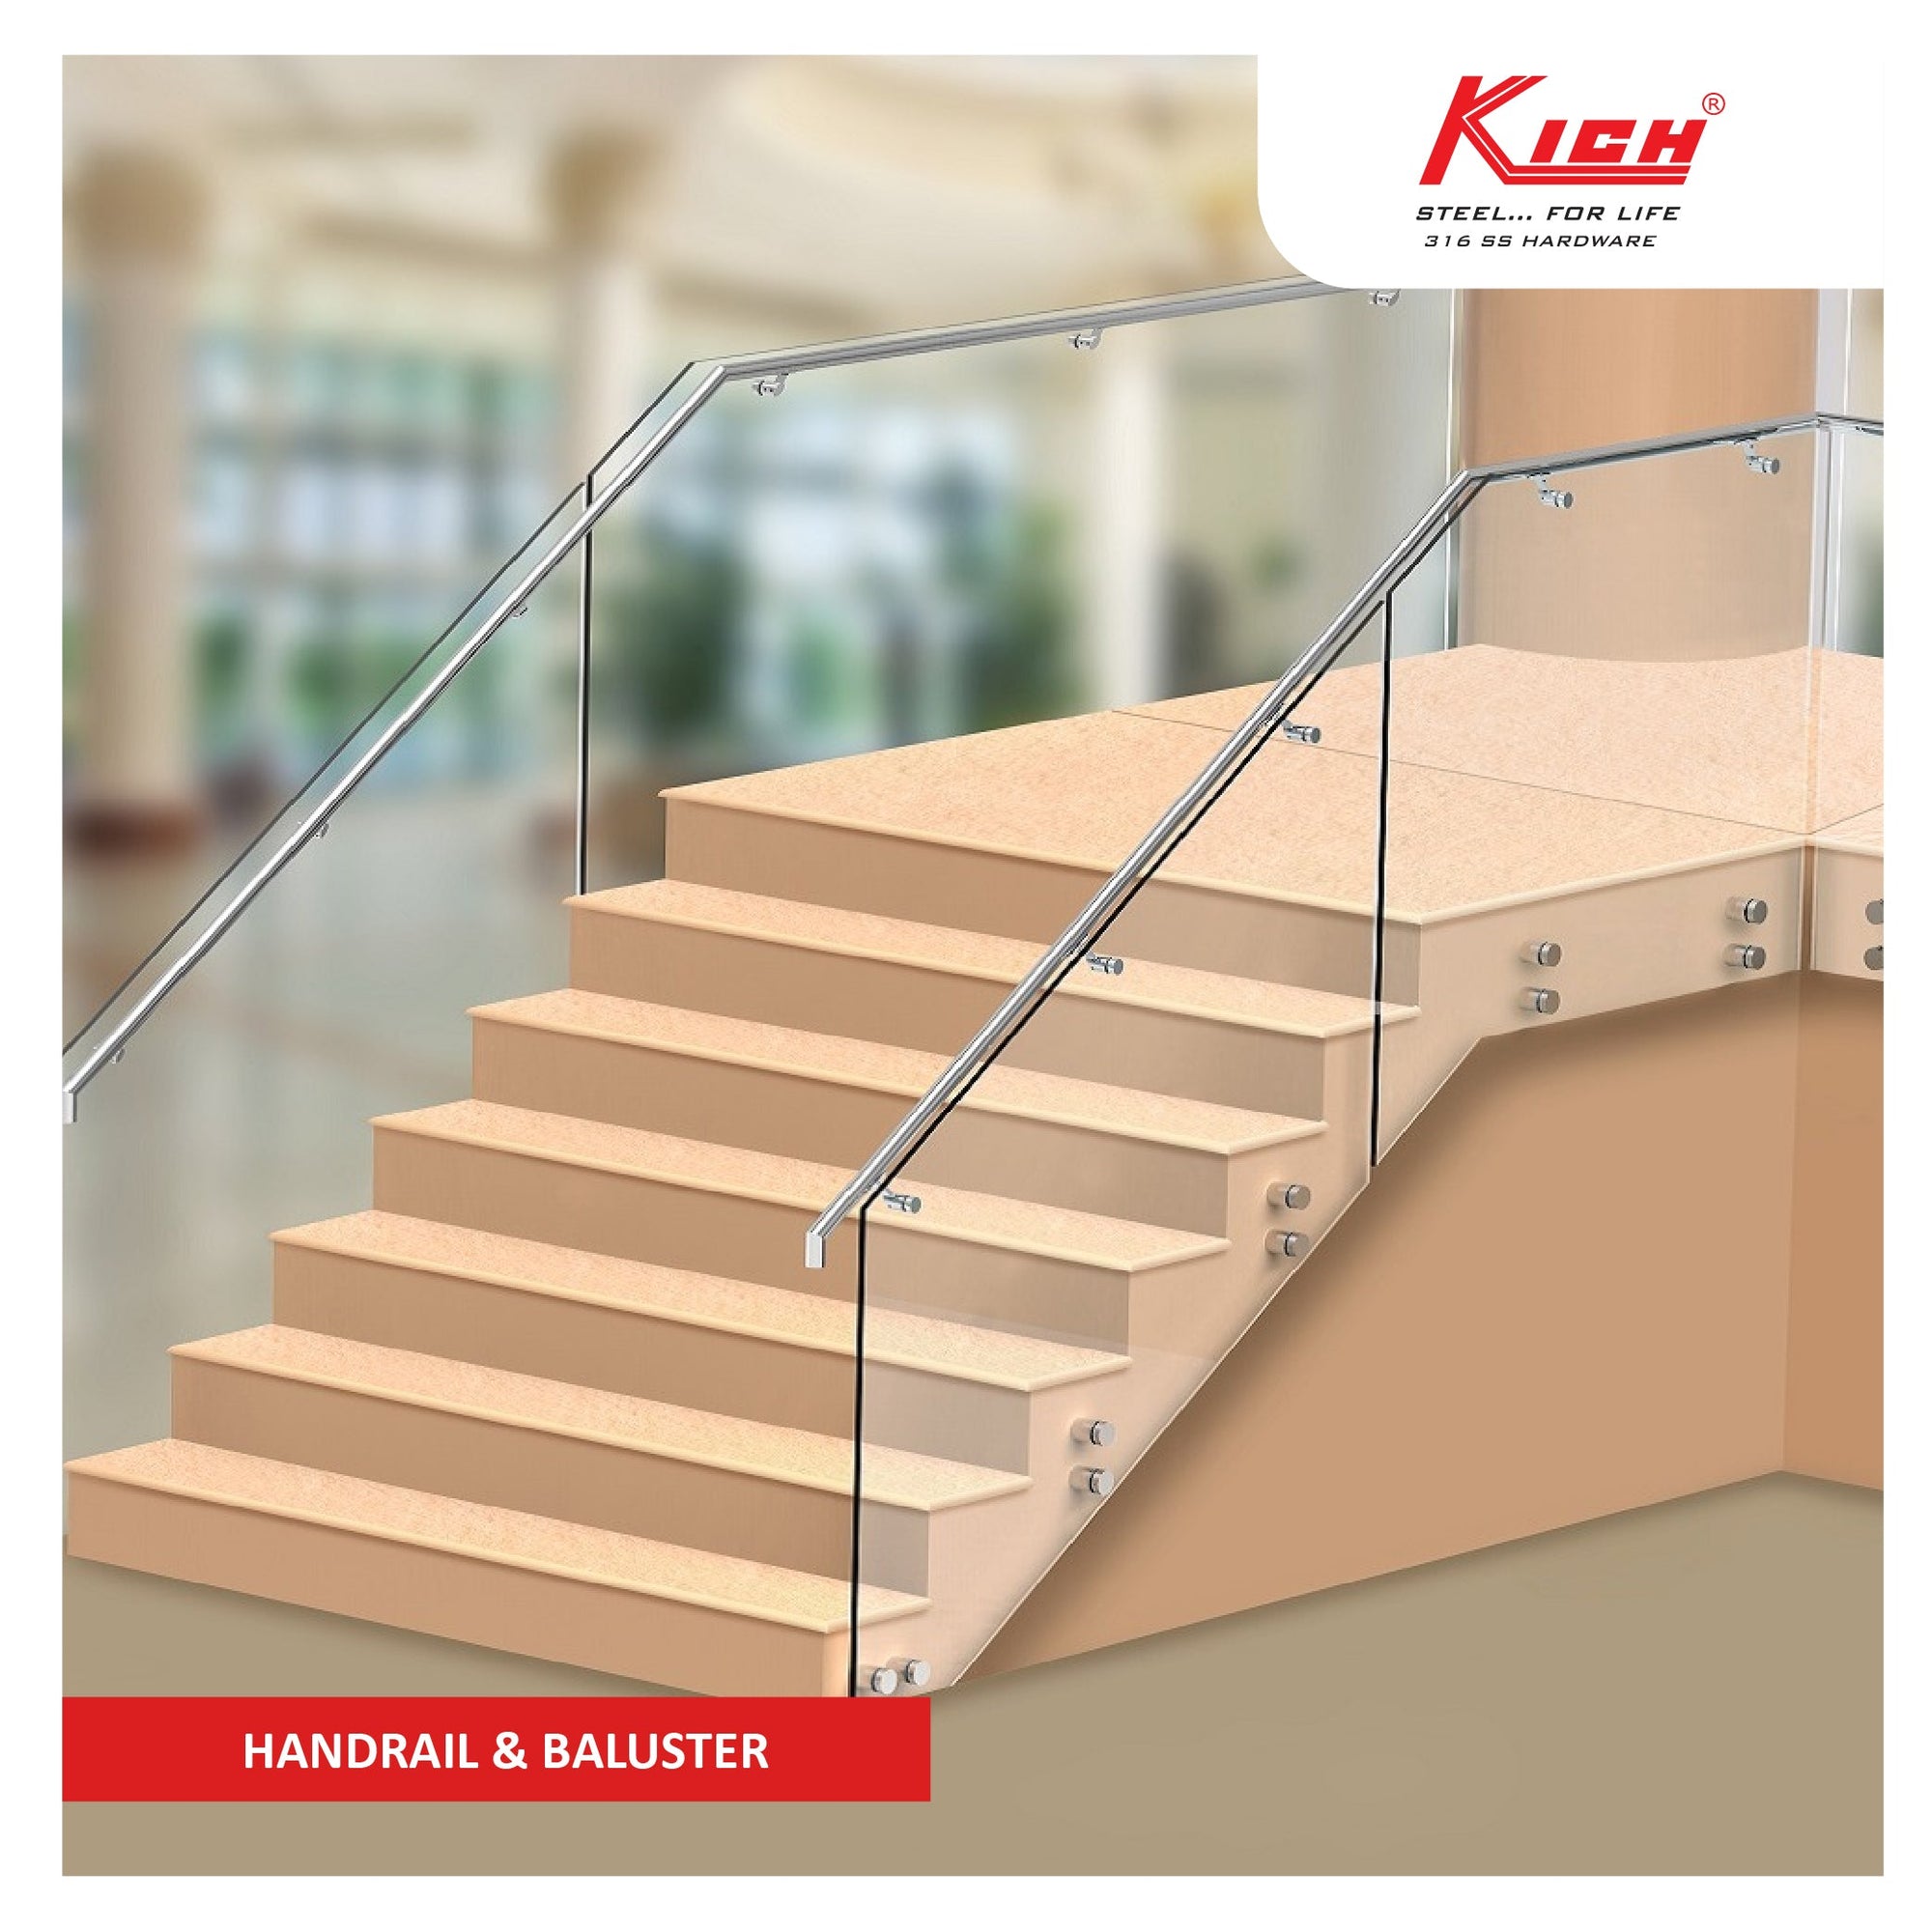 Kich Hand Rails - Enhance safety and mobility with sturdy and stylish handrails for added support and accessibility.